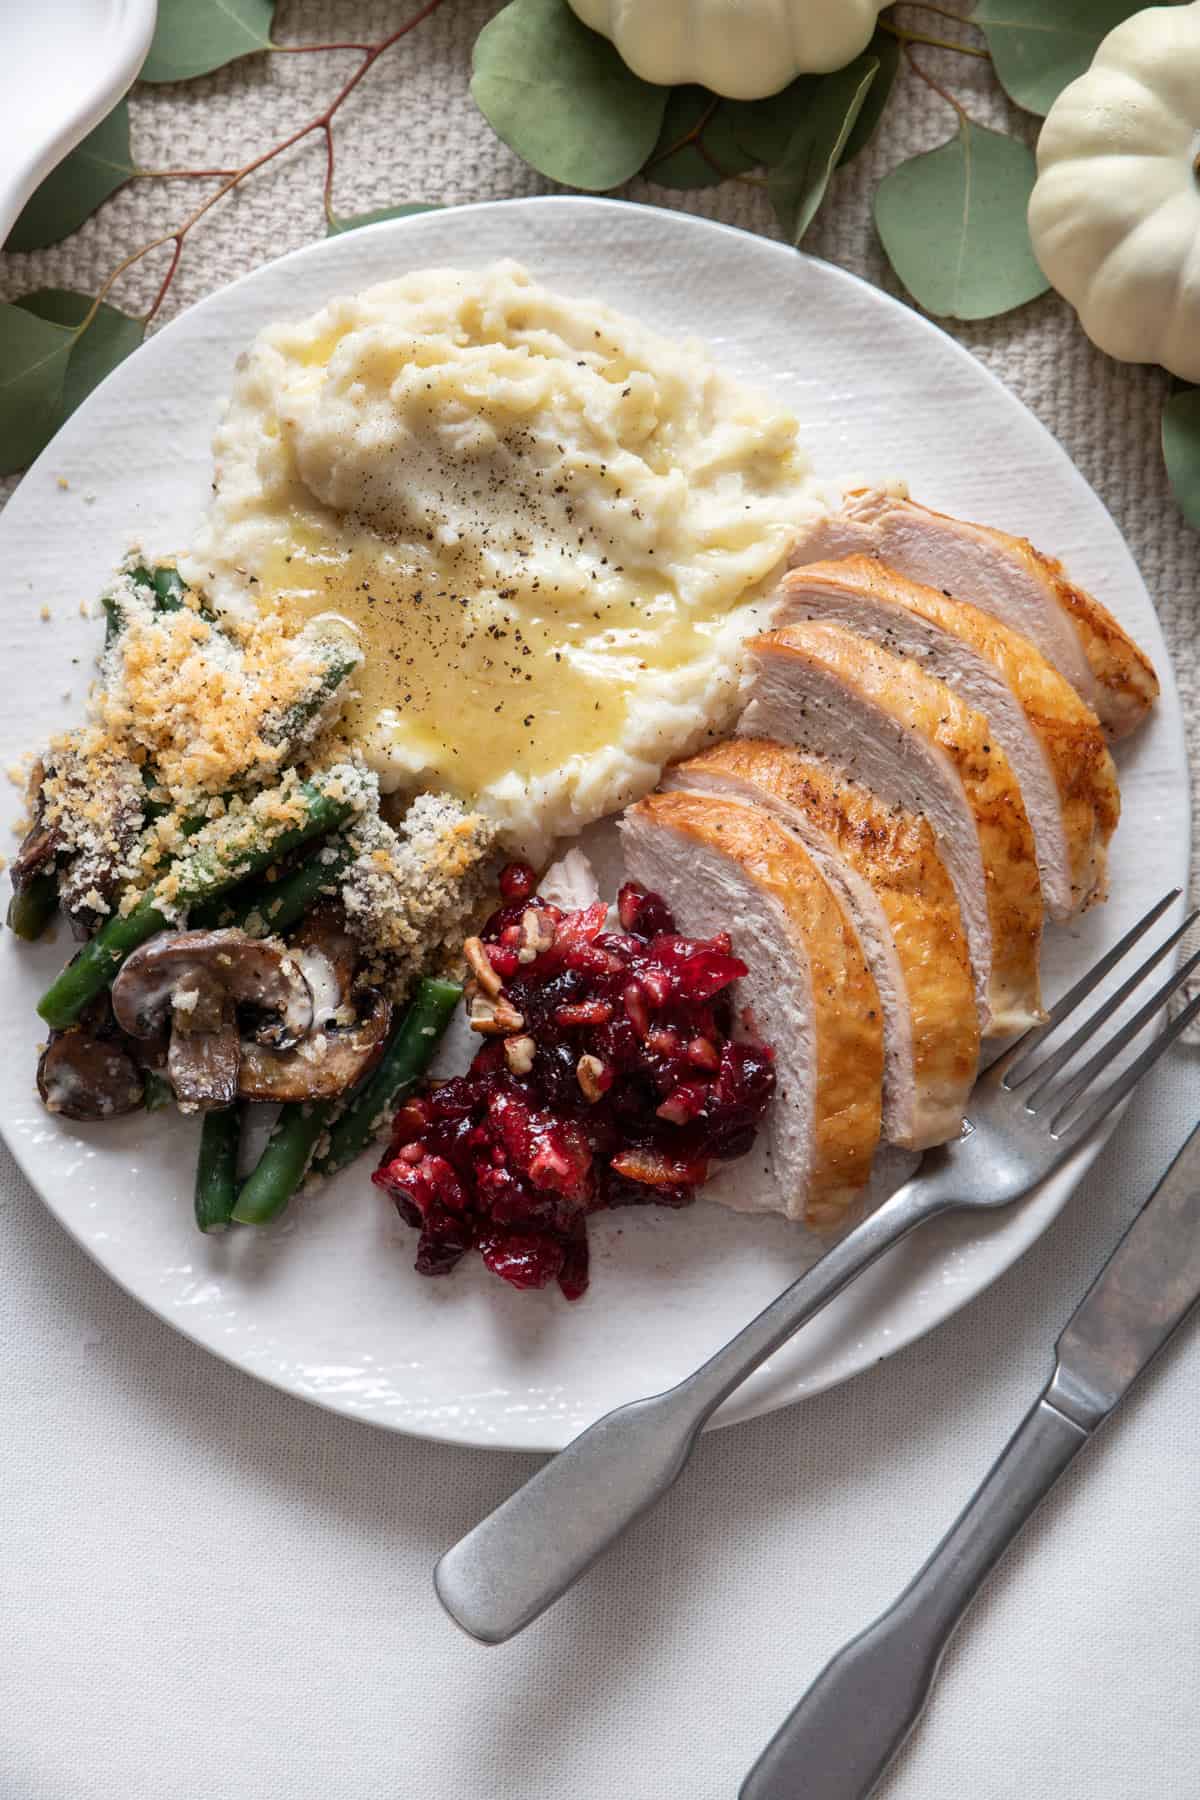 Plate at thanksgiving with turkey, mashed potatoes, cranberry and green beans